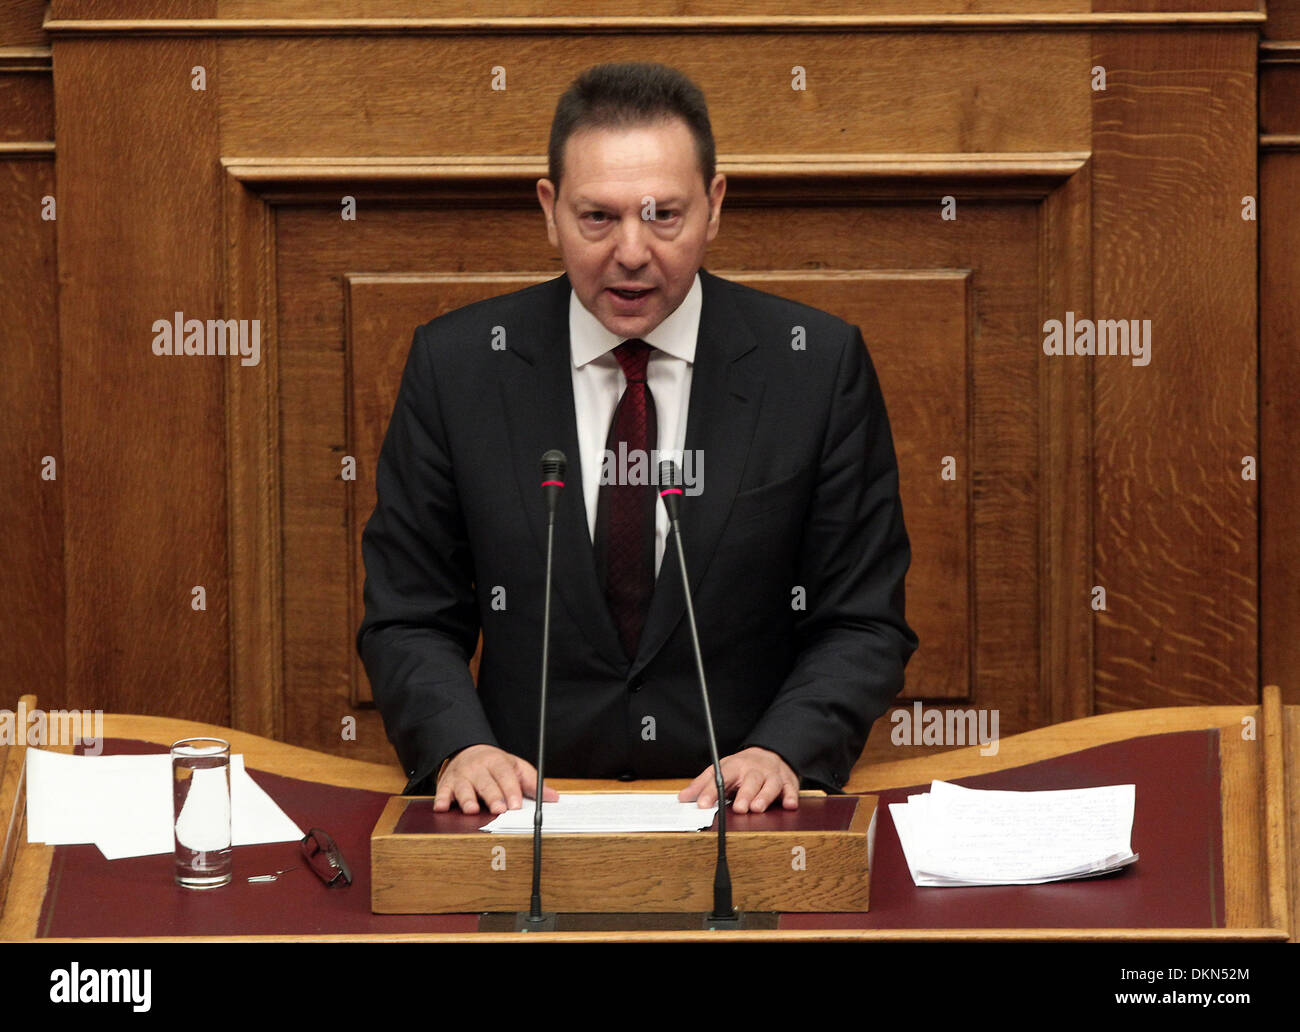 Athens, Greece. 7th Dec, 2013. Greek Finance Minister Ioannis Stournaras delivers a speech during debate in parliament ahead of a vote on the 2014 budget draft in Athens, Greece, Dec. 7, 2013. © Marios Lolos/Xinhua/Alamy Live News Stock Photo